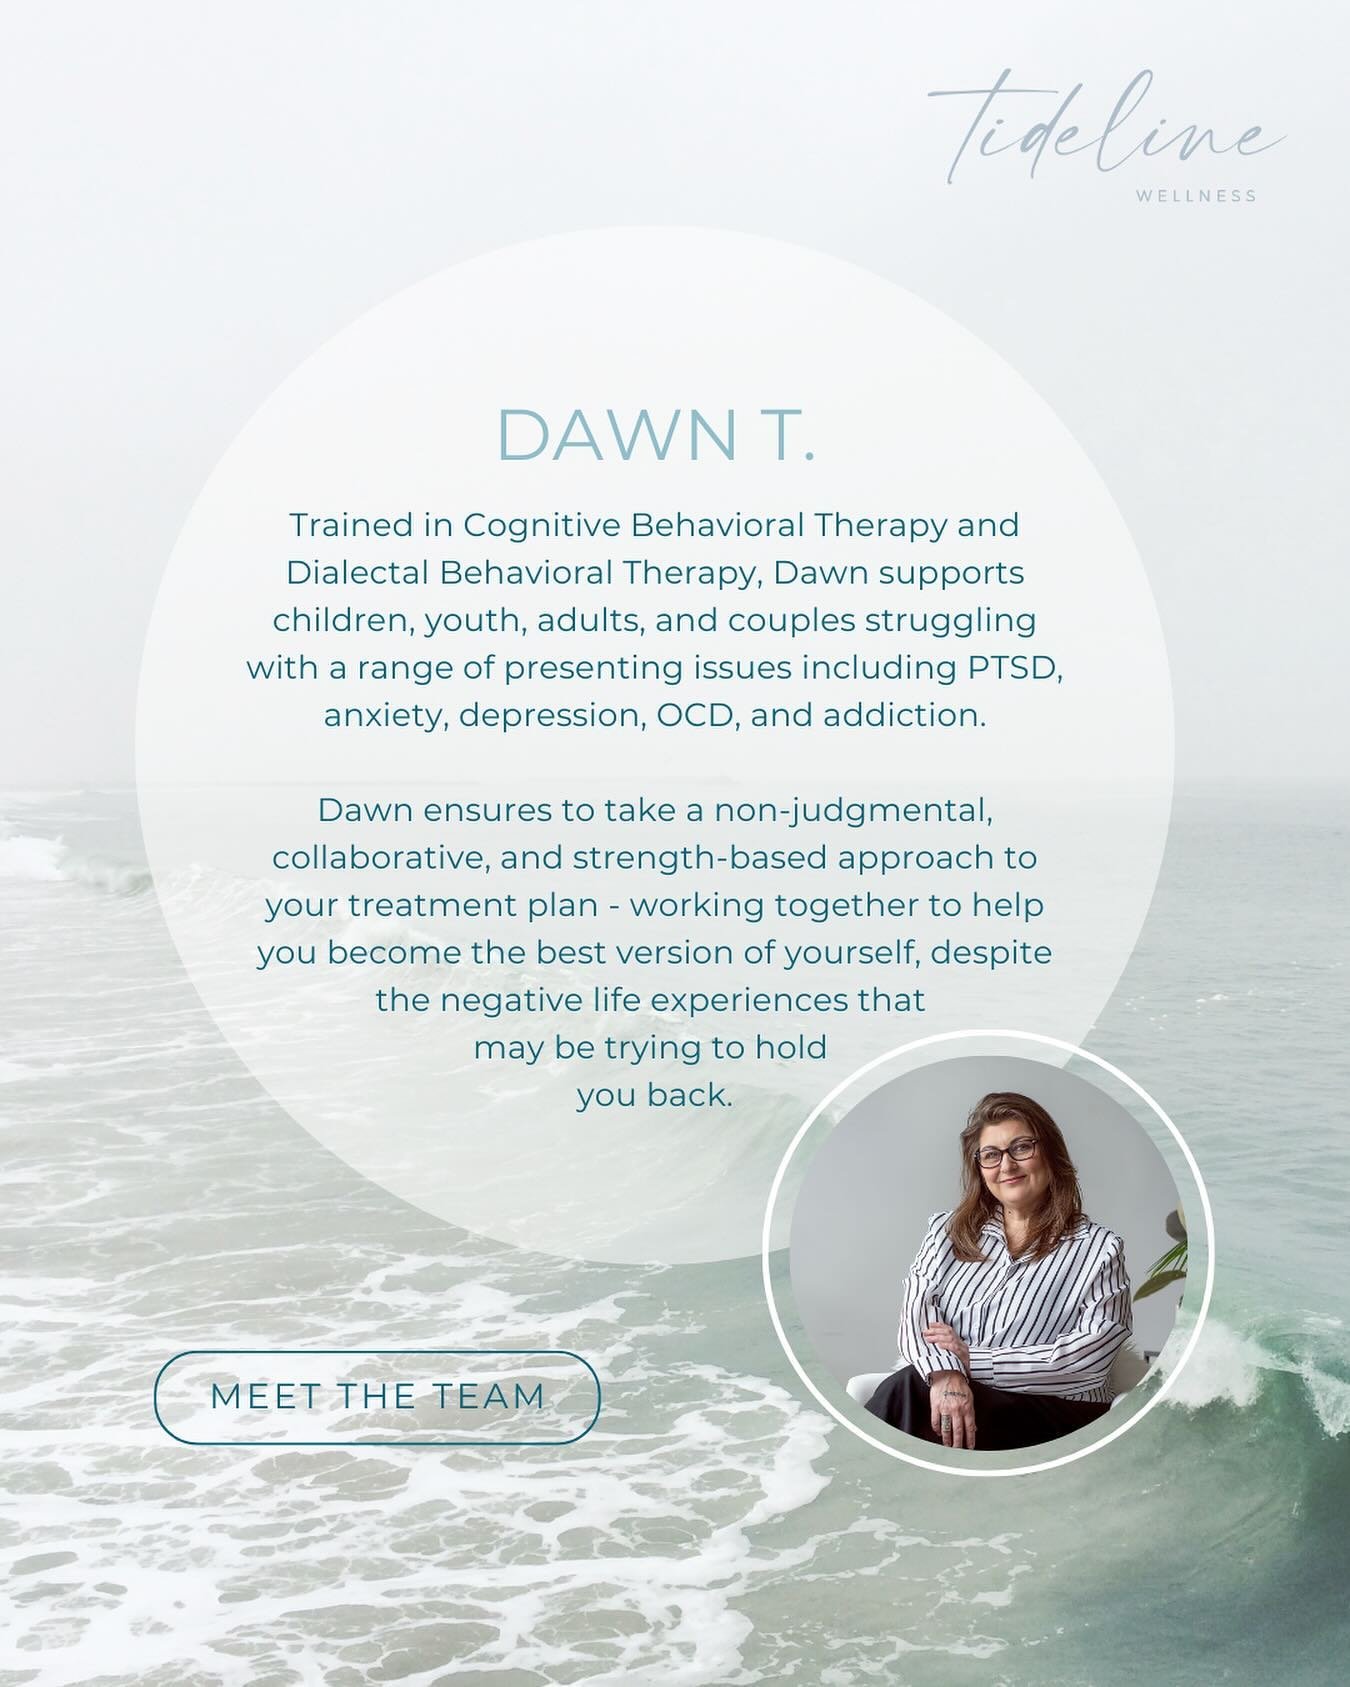 Join us in welcoming Dawn Thibeault to @tidelinewellness 🎉

Dawn is trained in Cognitive Behavioral Therapy (CT) and Dialectal Behavioral Therapy (DBT) to help you become the best version of yourself despite the negative life experiences that may be